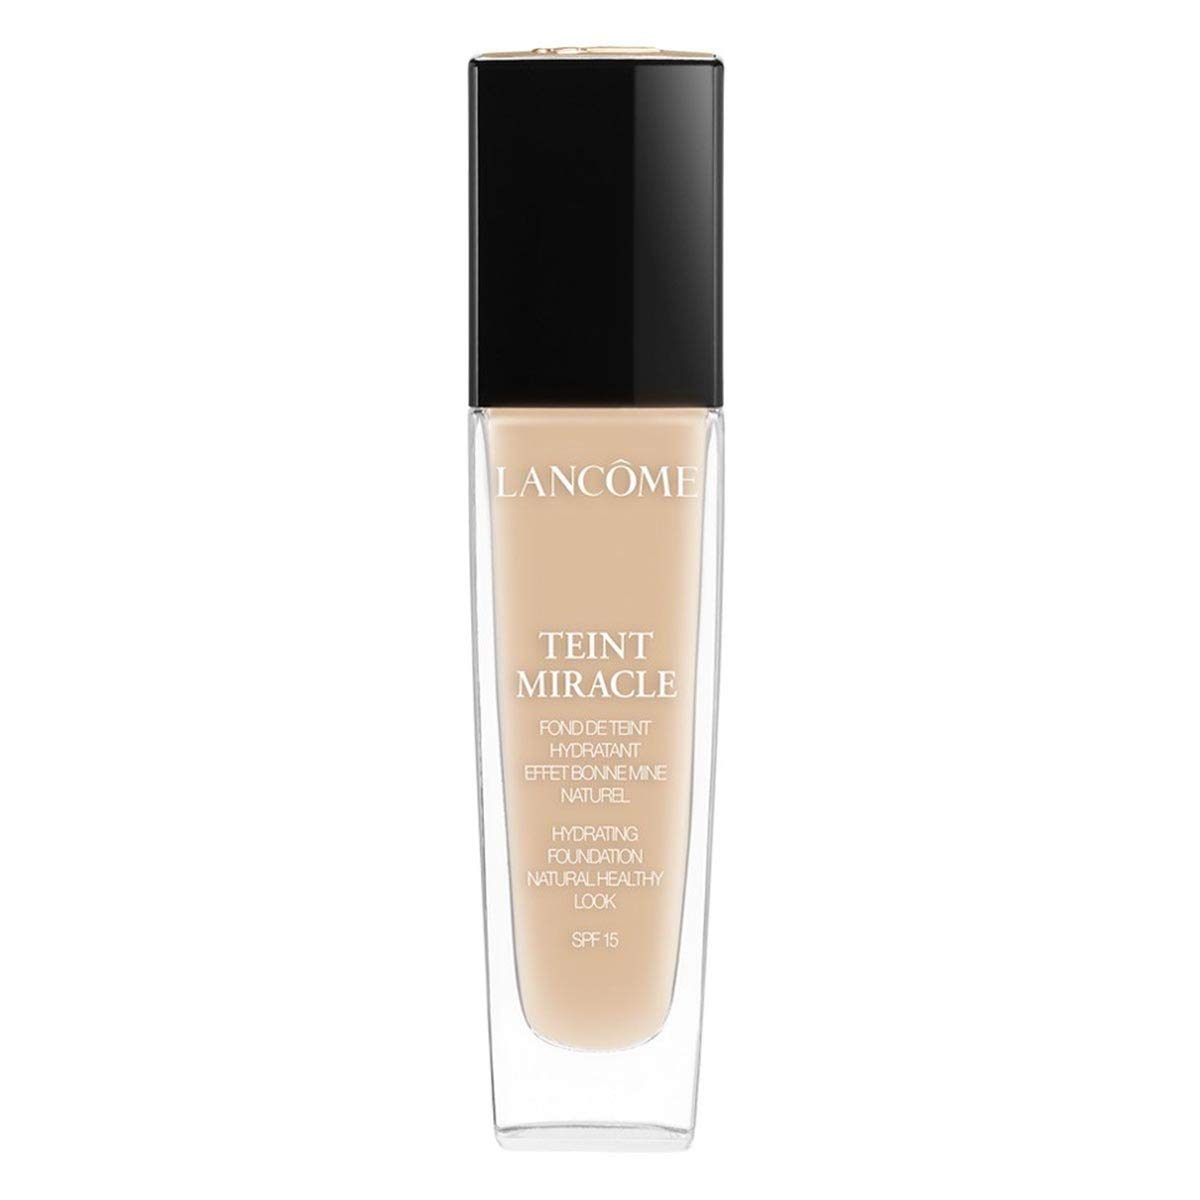 Clarins Teint Miracle Foundation 14 Brownie 30ml